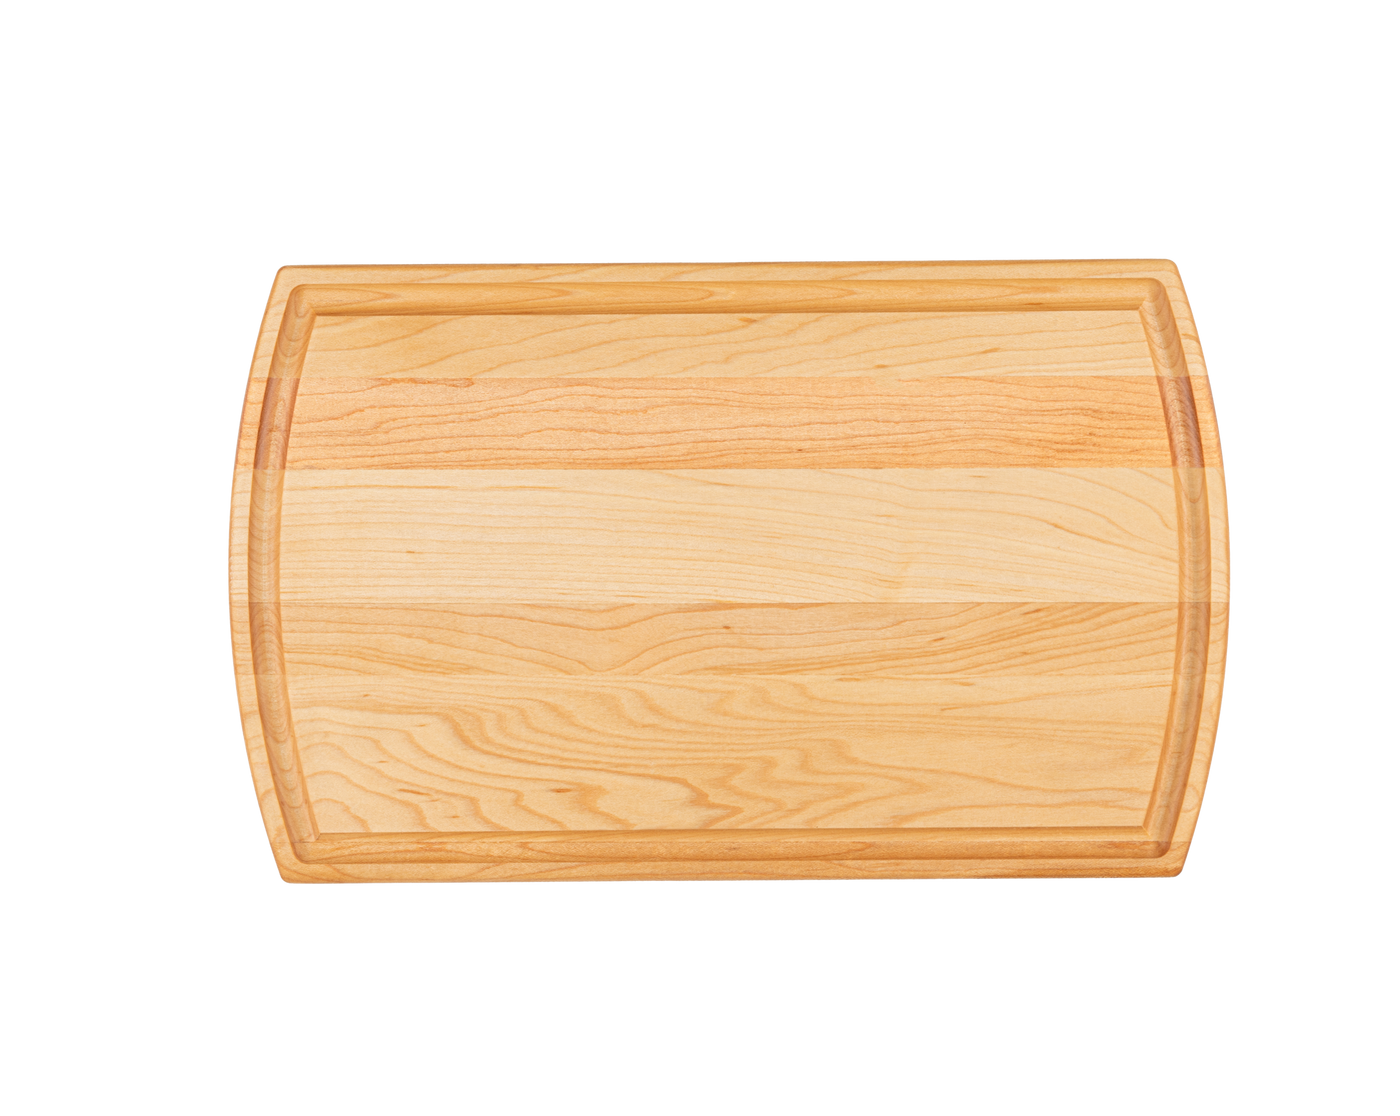 Maple - RO14 - Small Arched Cutting Board with Juice Groove 14-1/4’’x8’’x3/4’’